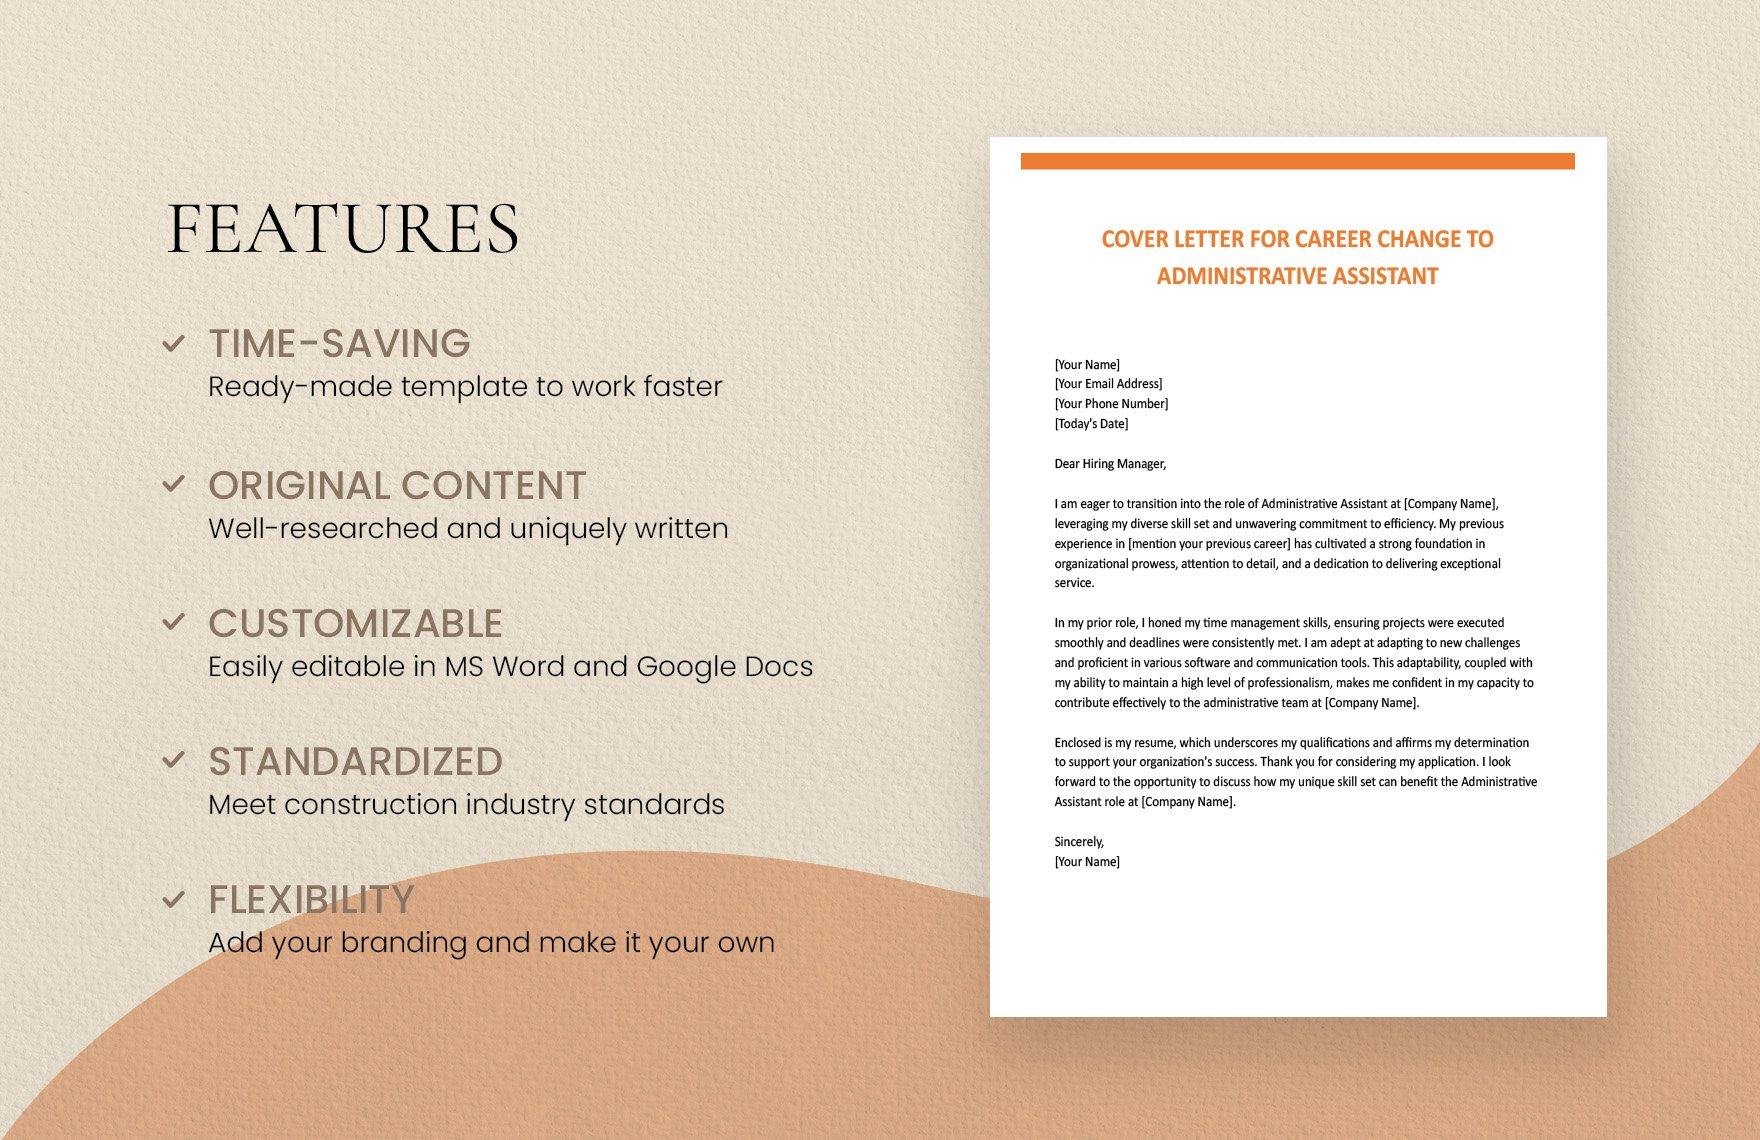 Cover Letter For Career Change To Administrative Assistant